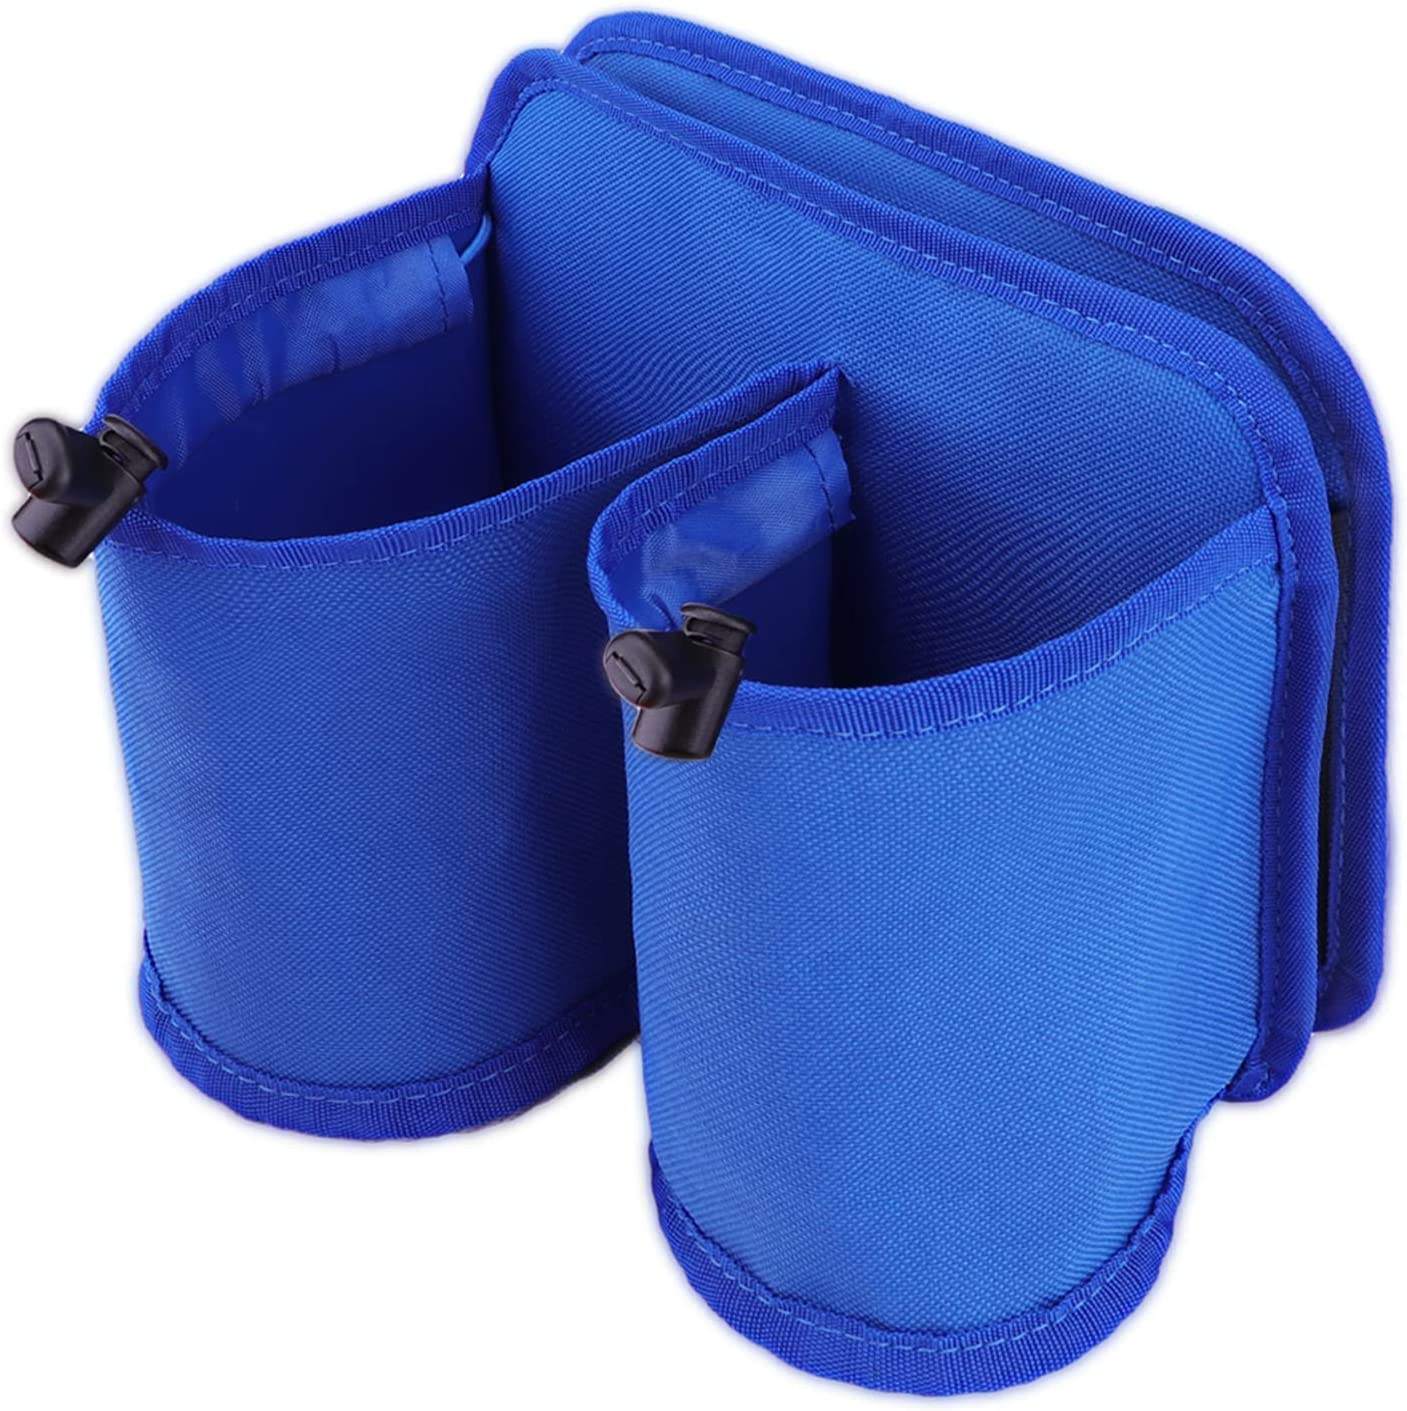 Luggage Travel Drink Bag Cup Holder Free Your Hand Beverages Caddy Luggage Travel Drink Coffee Cup Holder Bag Wholesale